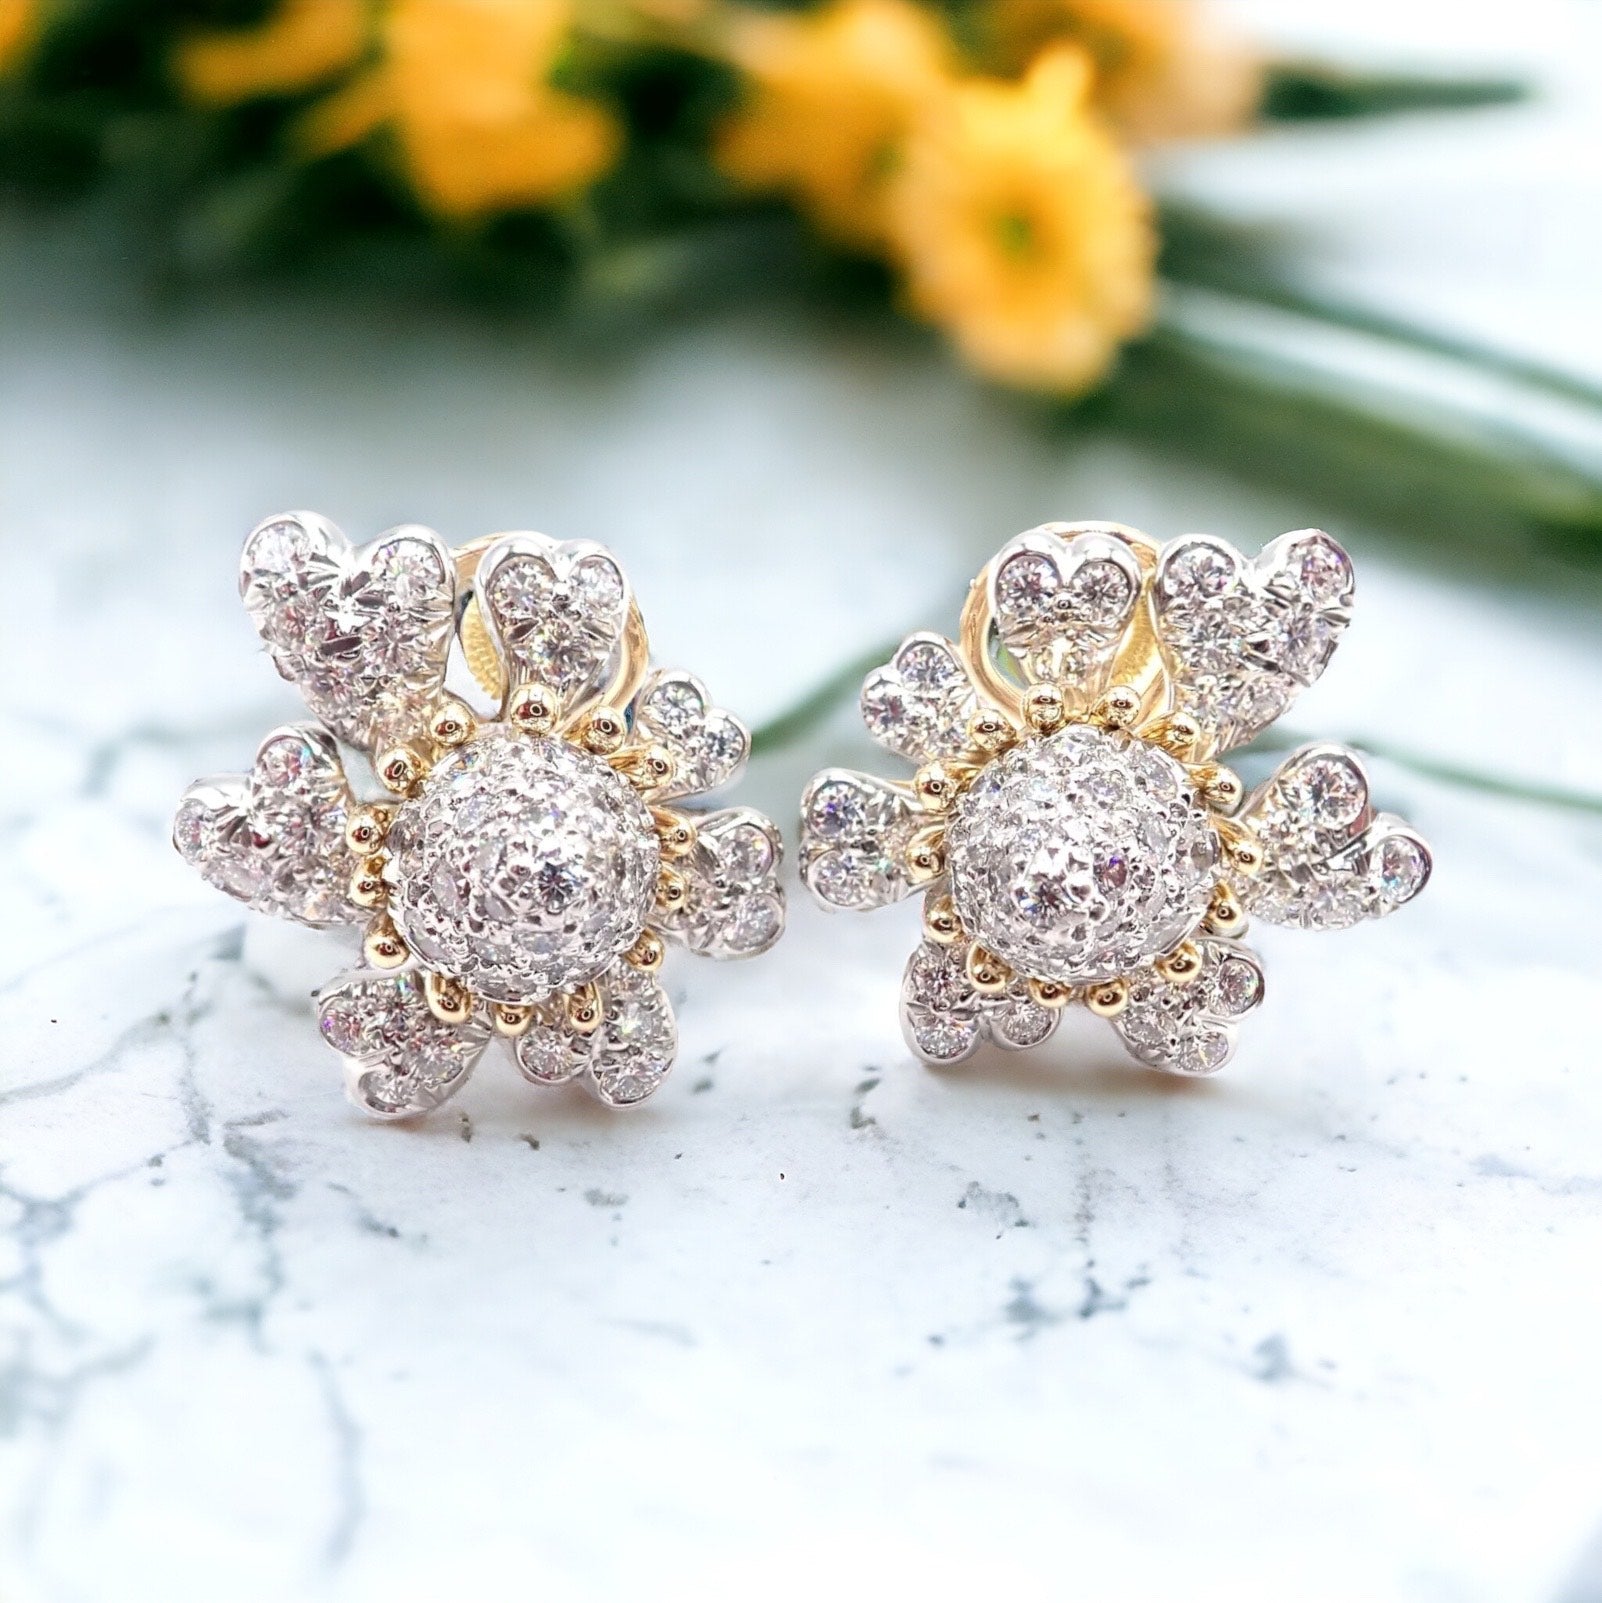 vintage diamond earrings from Fortrove